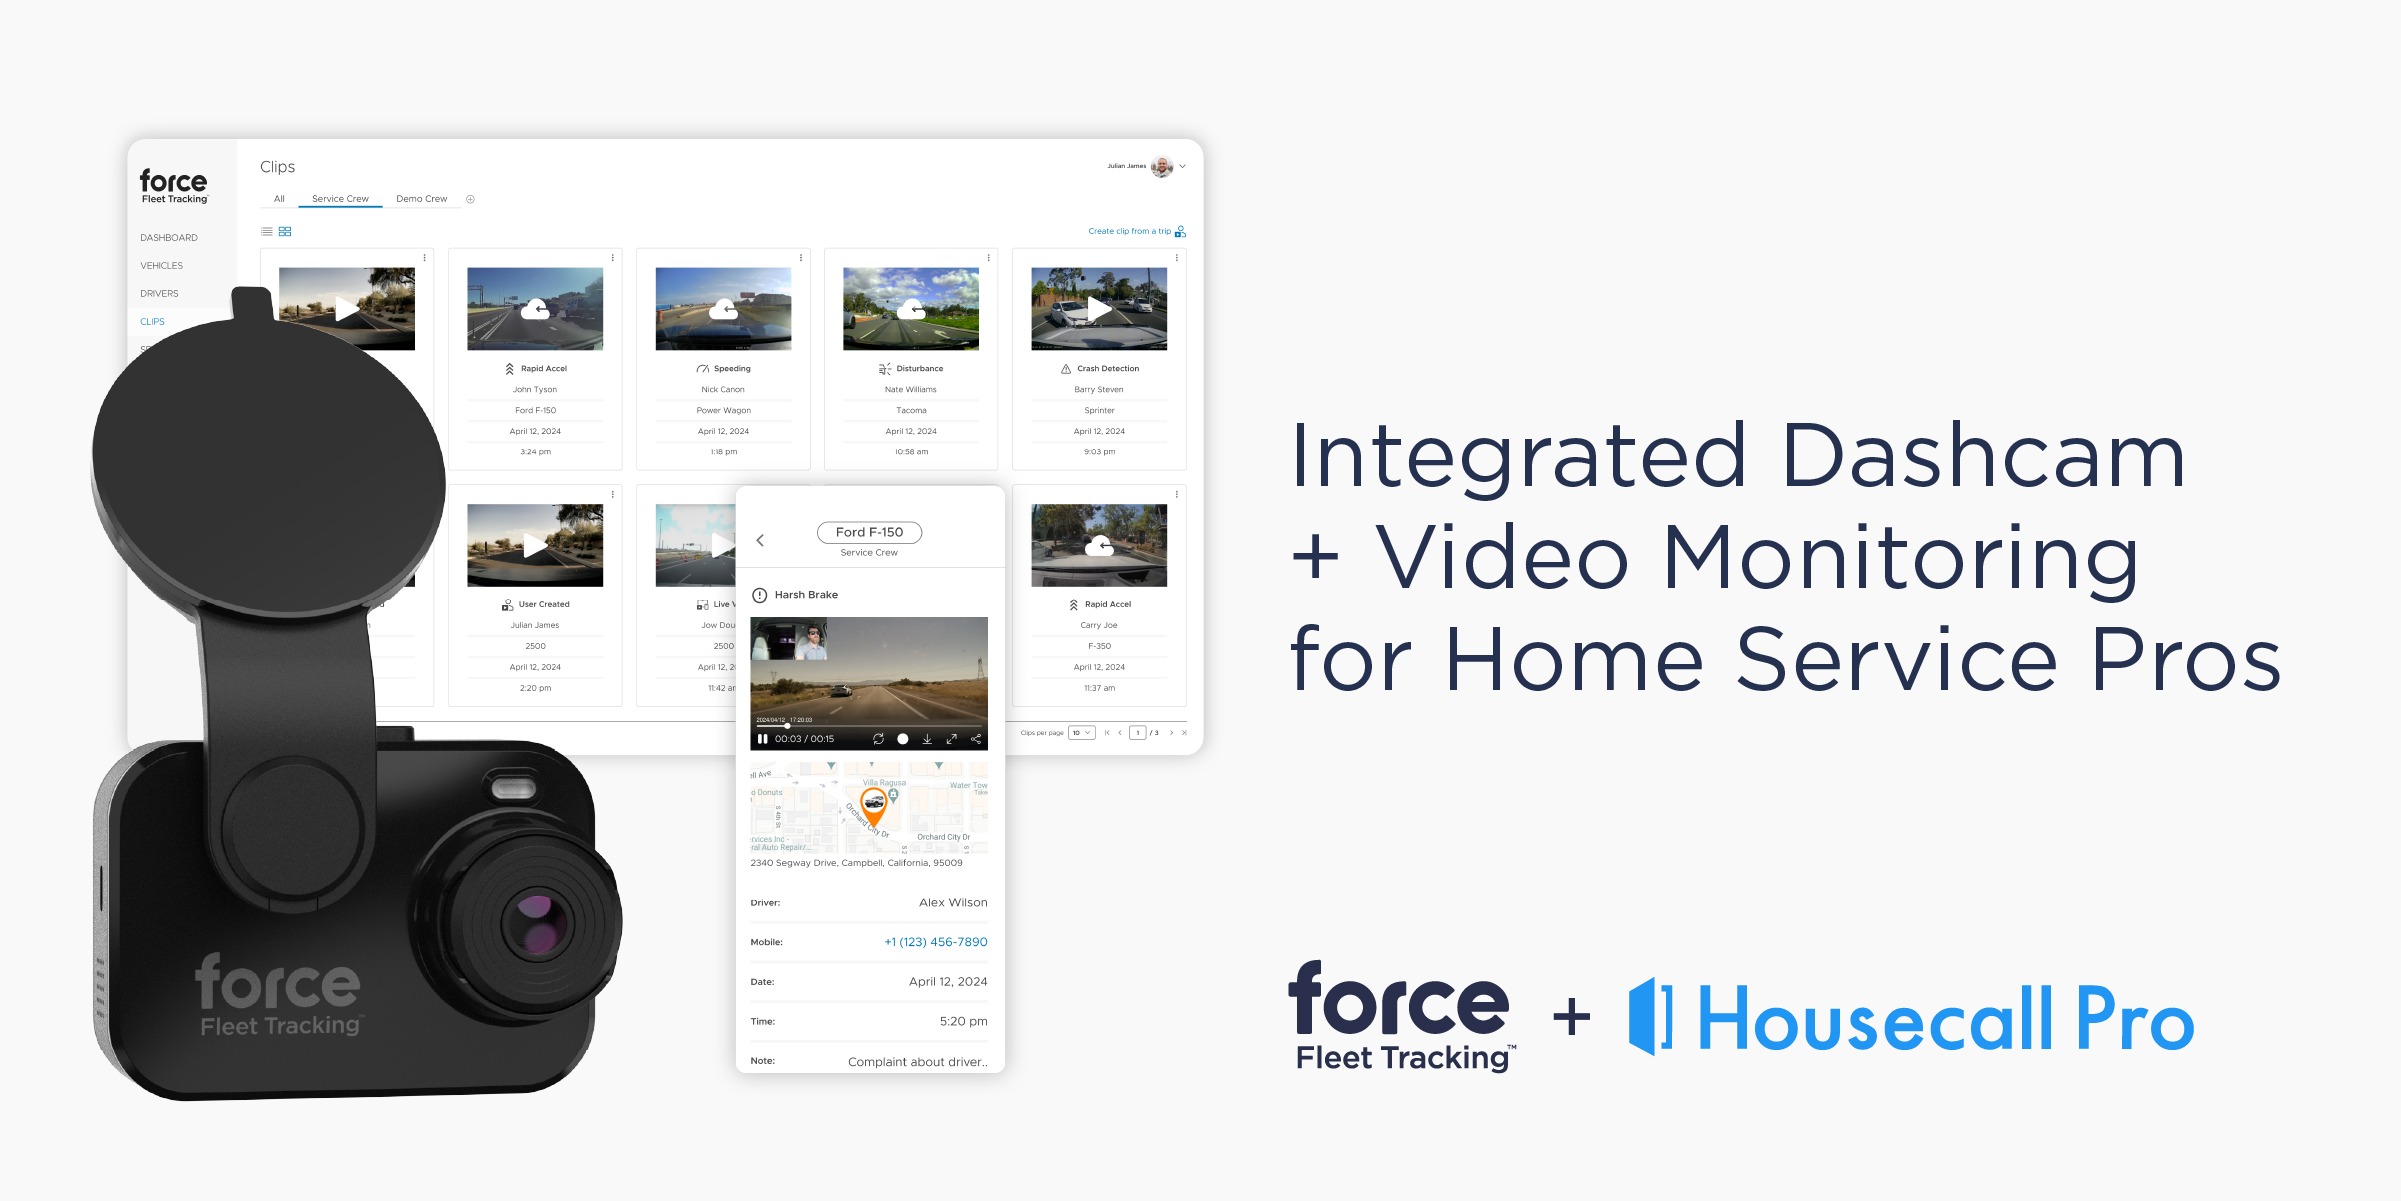 Force Fleet Tracking and Housecall Pro Introduce New Dashcam &amp; Integrated Video Telematics Service for Business Fleets